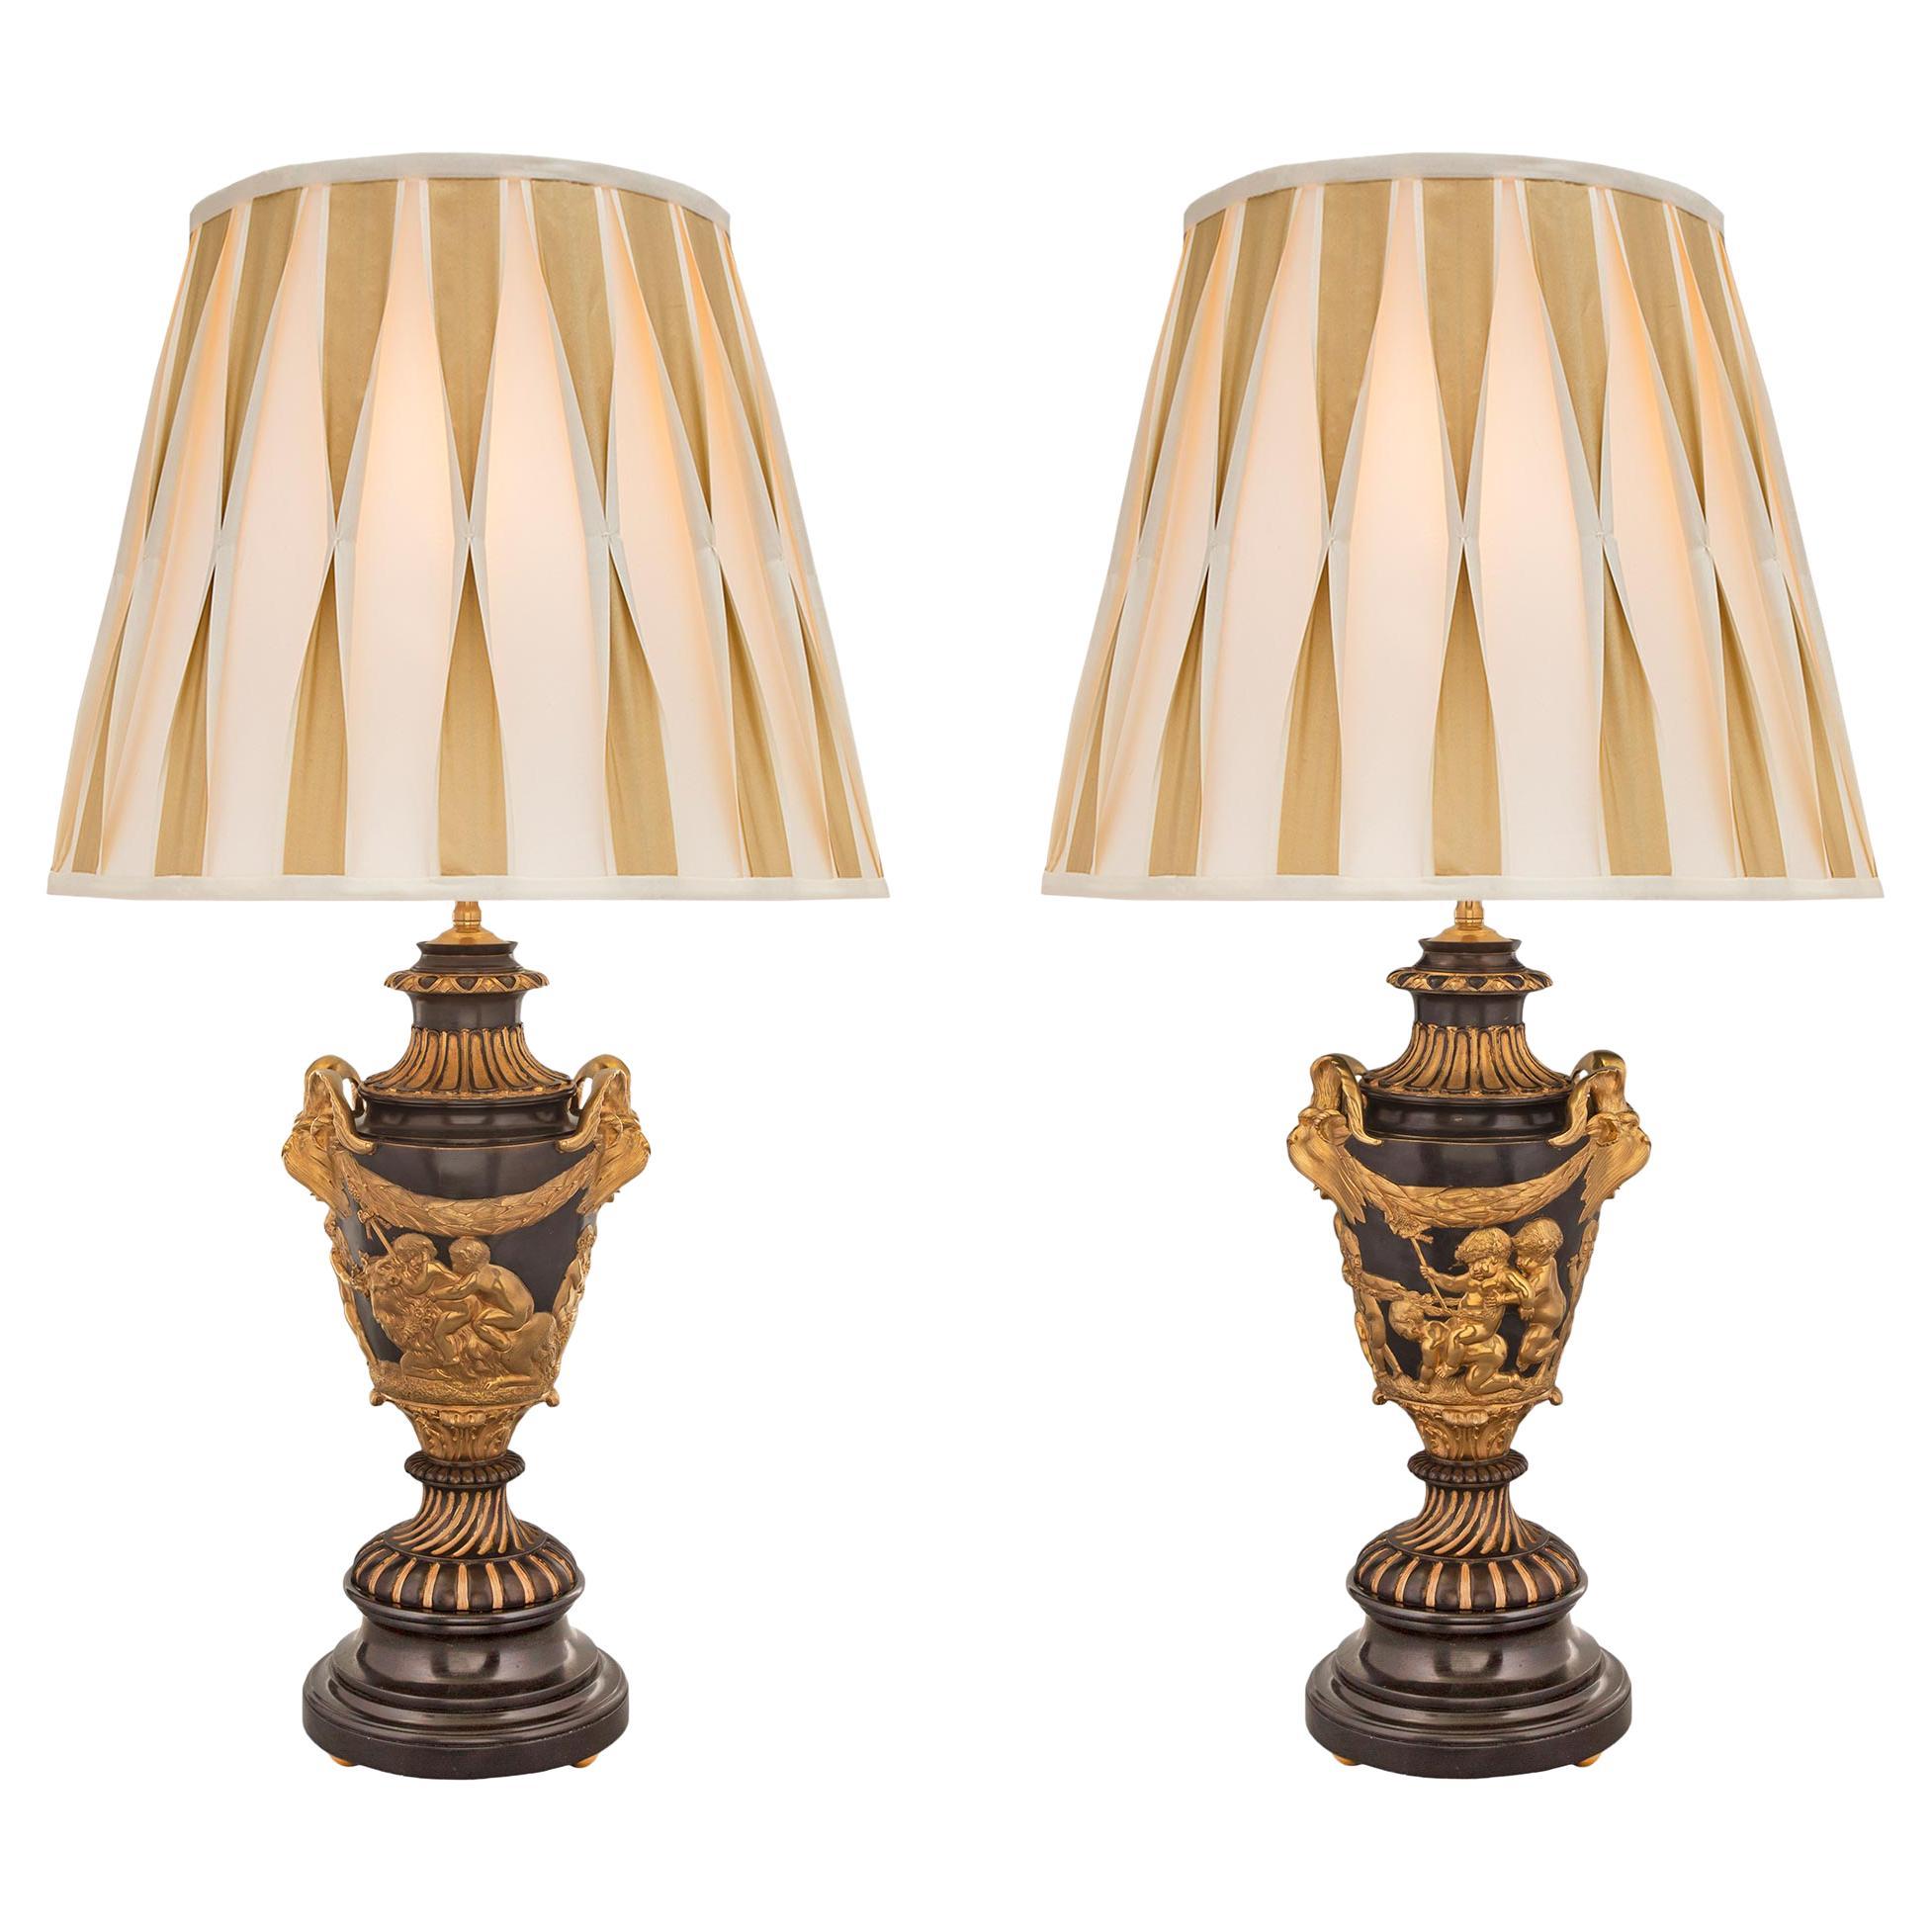 Pair of French 19th Century Neoclassical Lamps in the Manner of Clodion For Sale